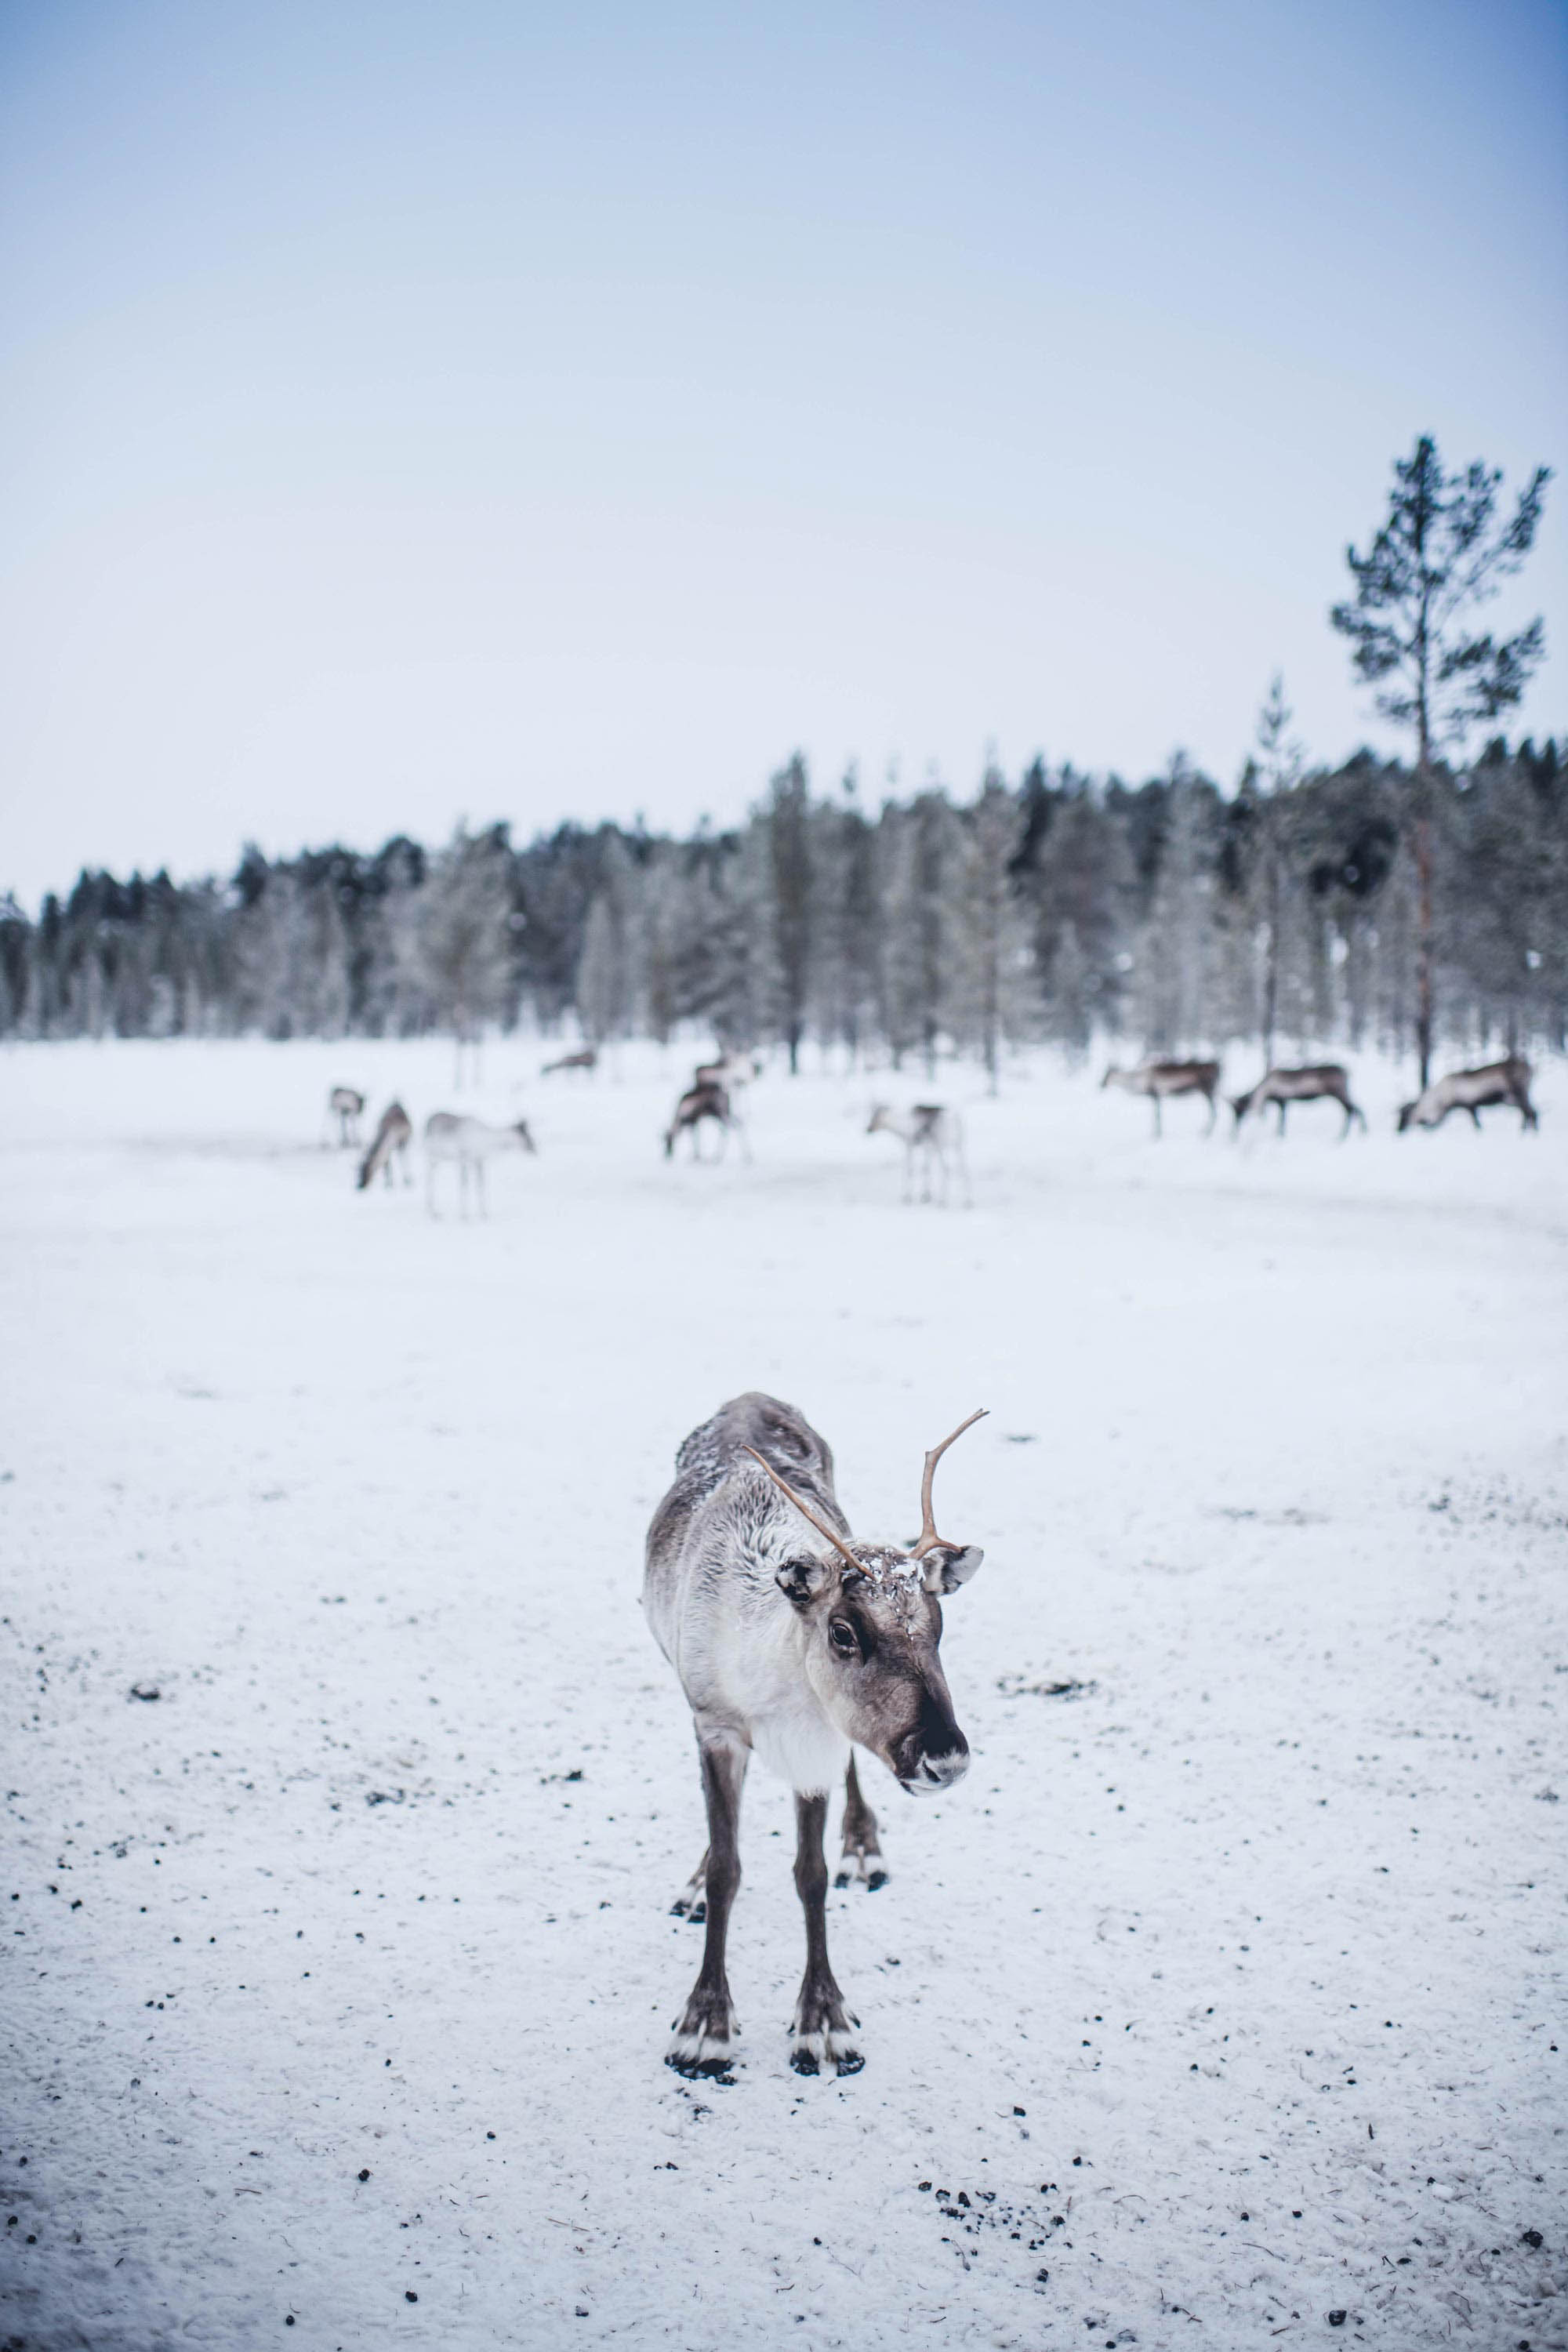 Single, young reindeer in snowy foreground with herd behind